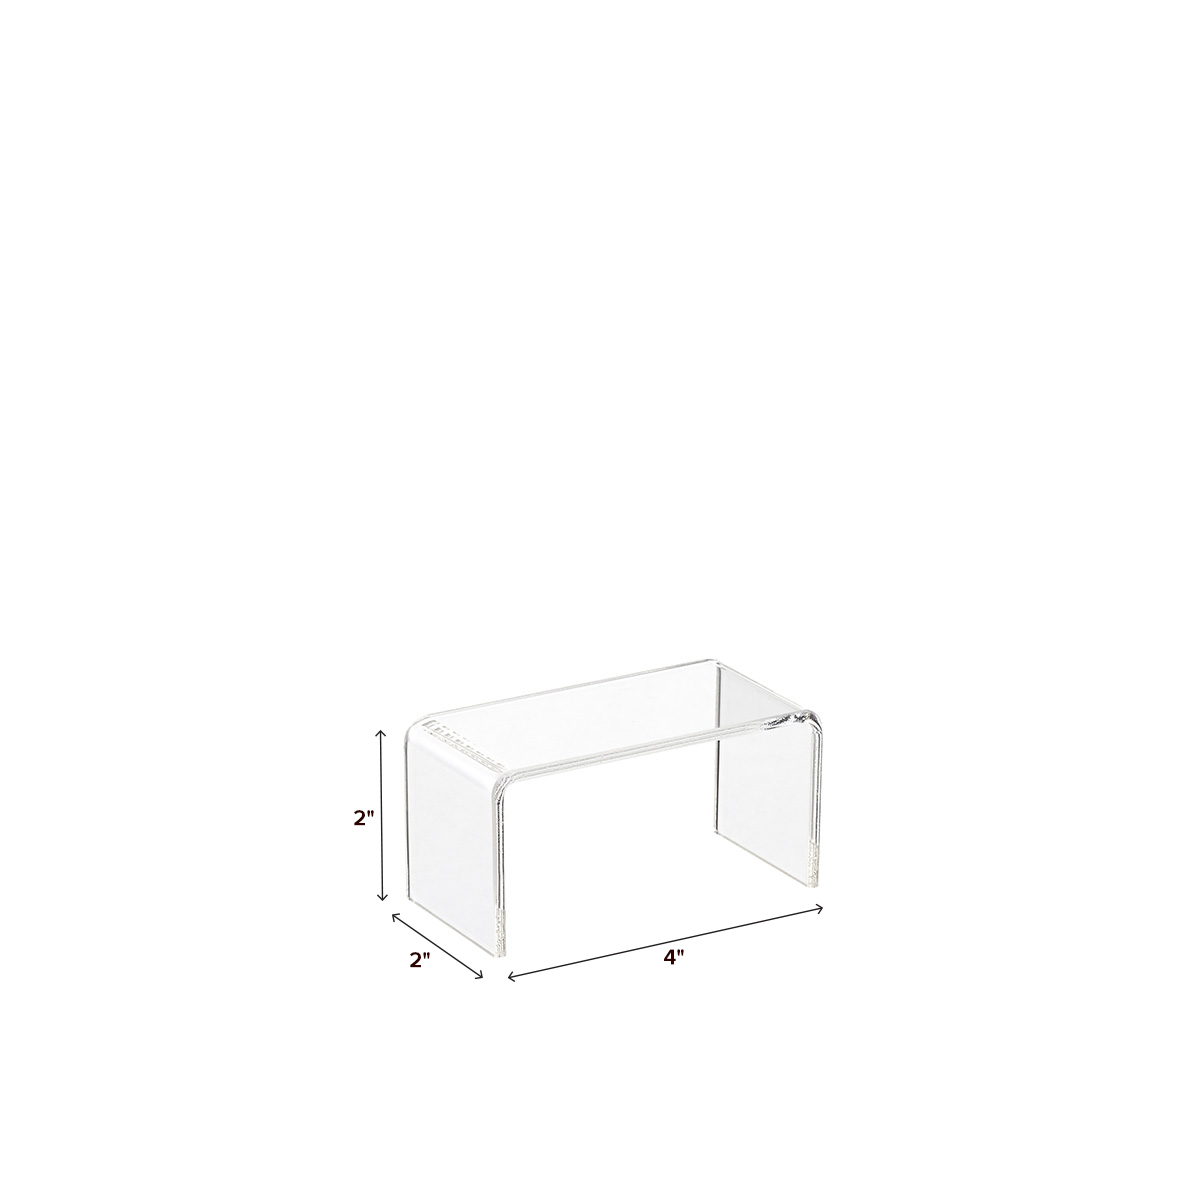 Plymor Clear Acrylic Solid Cylinder Round Display Riser 1.5 inches Height Width x 2 inches 